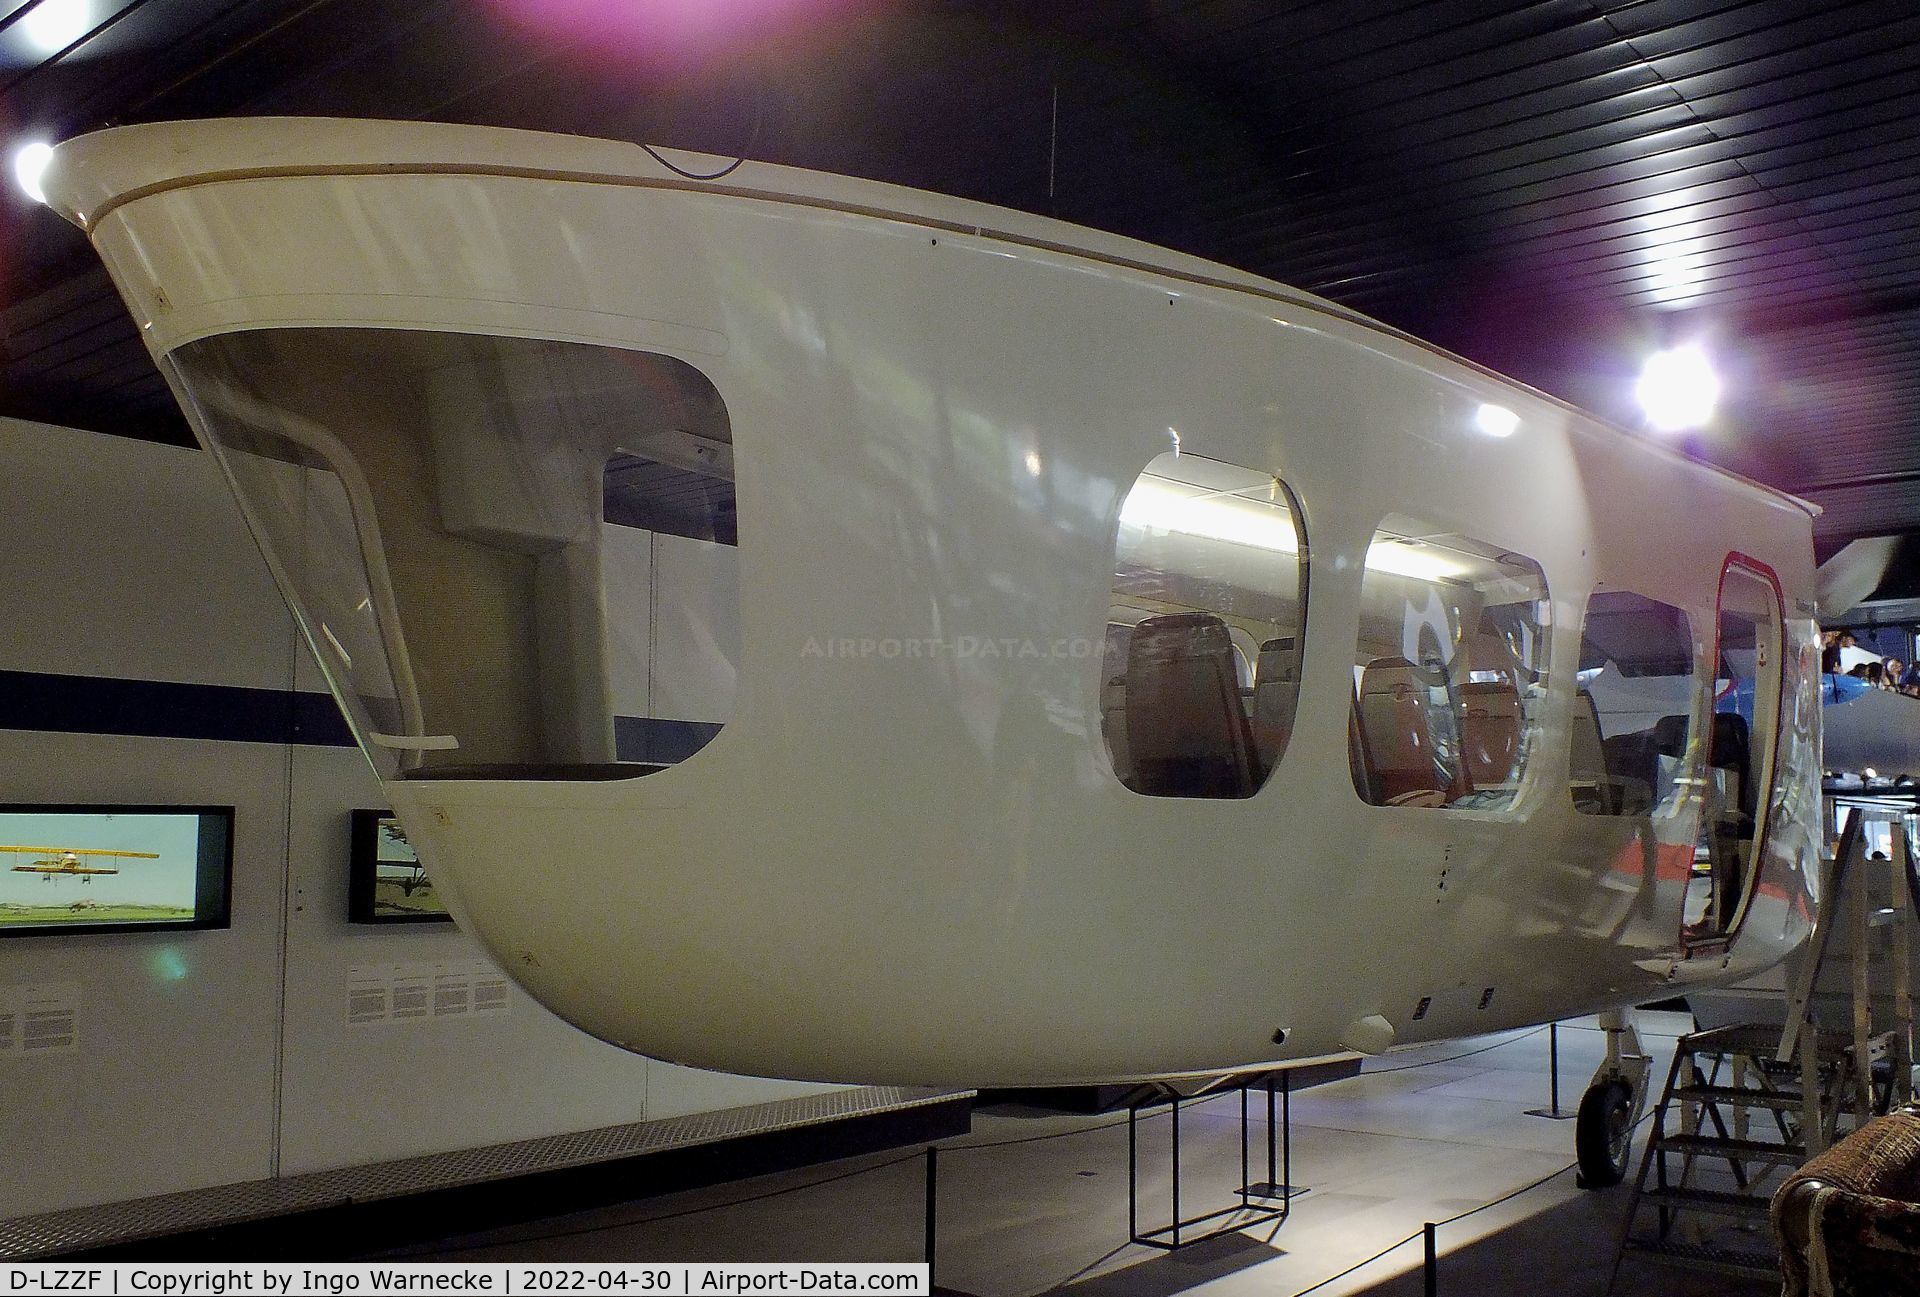 D-LZZF, 1998 Zeppelin NT07 C/N 3, Gondola of Zeppelin NT07, used from 2003 to 2014 and replaced after more than 12000 flight hours, at the Verkehrshaus der Schweiz, Luzern (Lucerne)